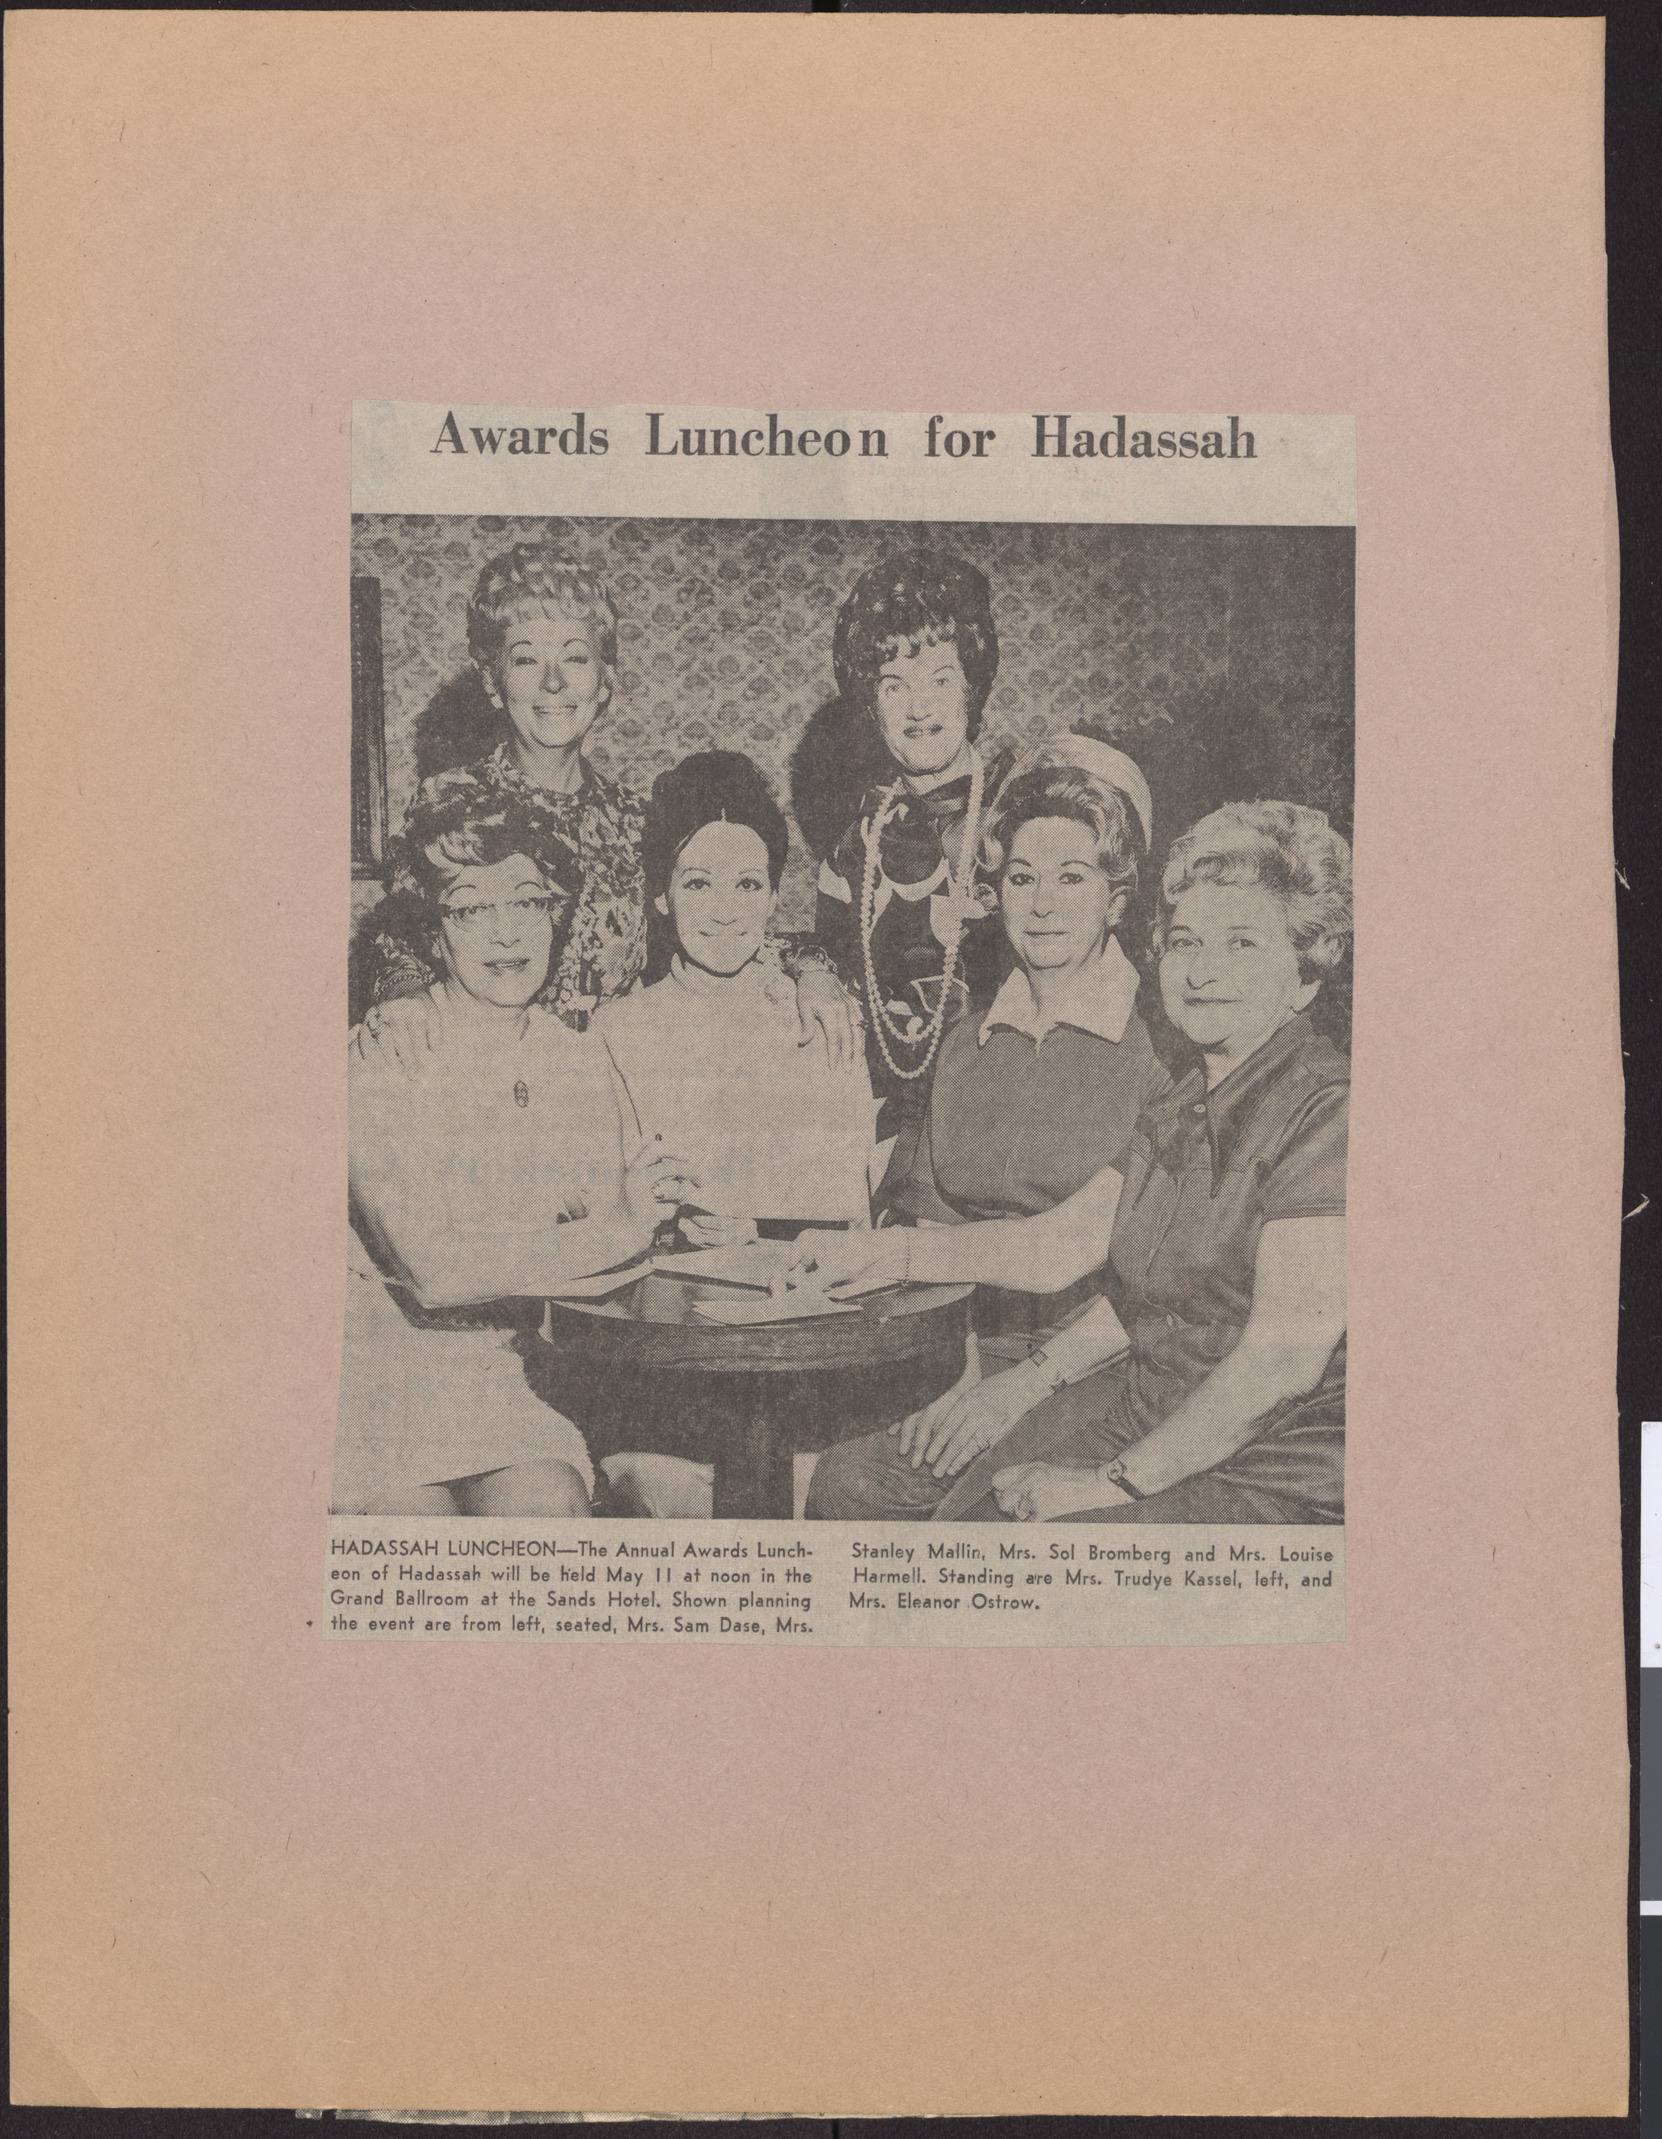 Newspaper clipping, Awards luncheon for Hadassah, publication and date unknown